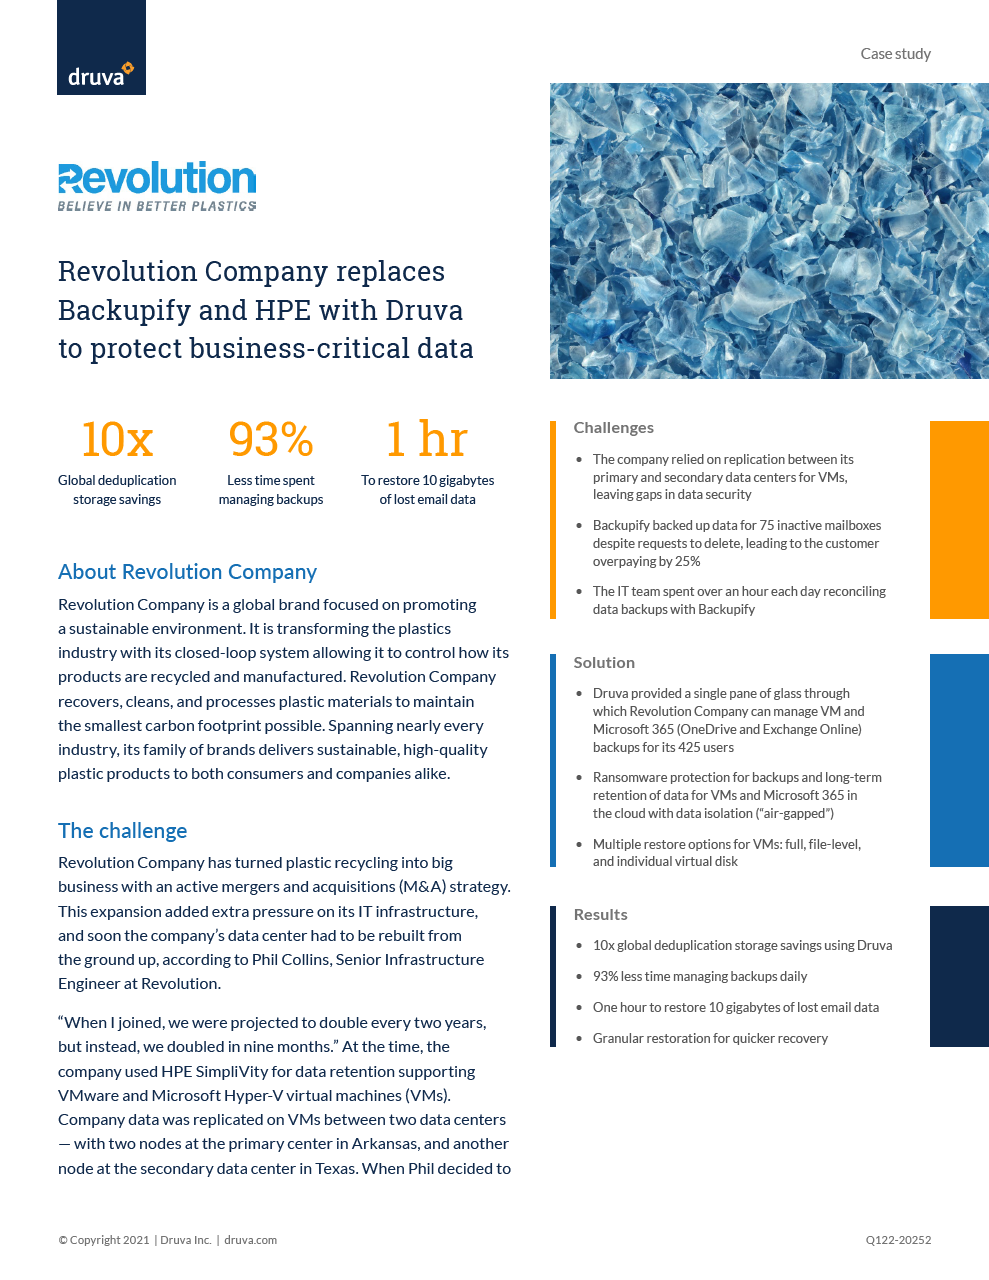 Revolution Company replaces Backupify and HPE with Druva to protect business-critical data